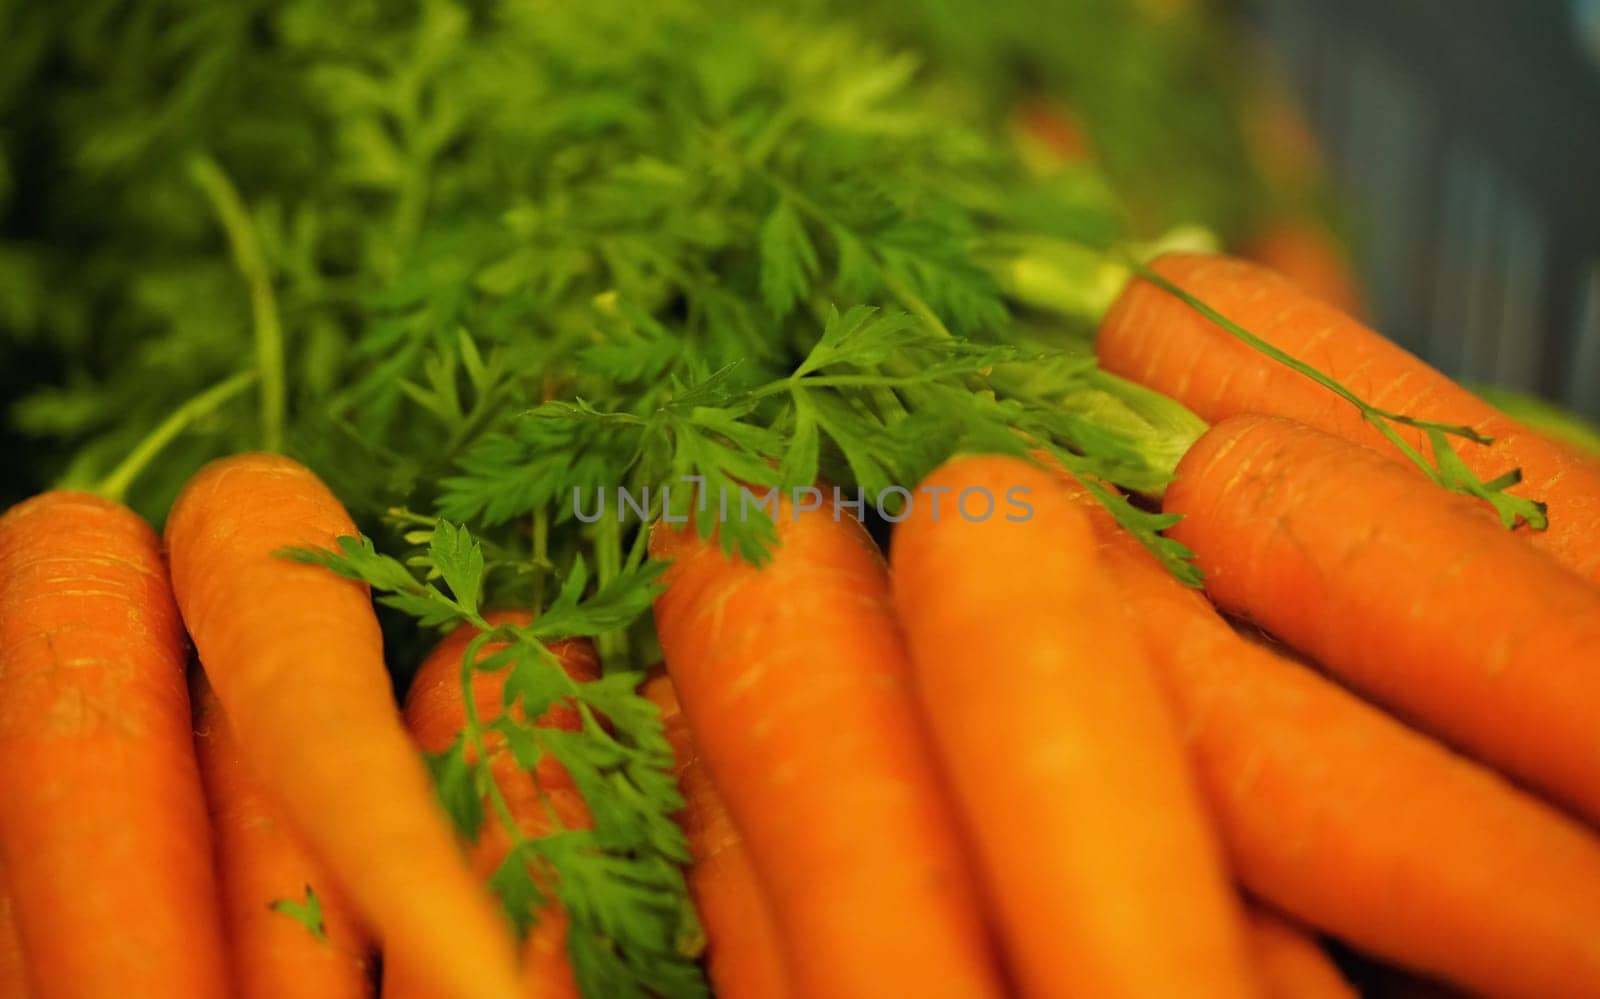 Bunch of bright orange carrots with green leaves, shallow depth of field photo, only small part of orange tuber in focus by Ivanko